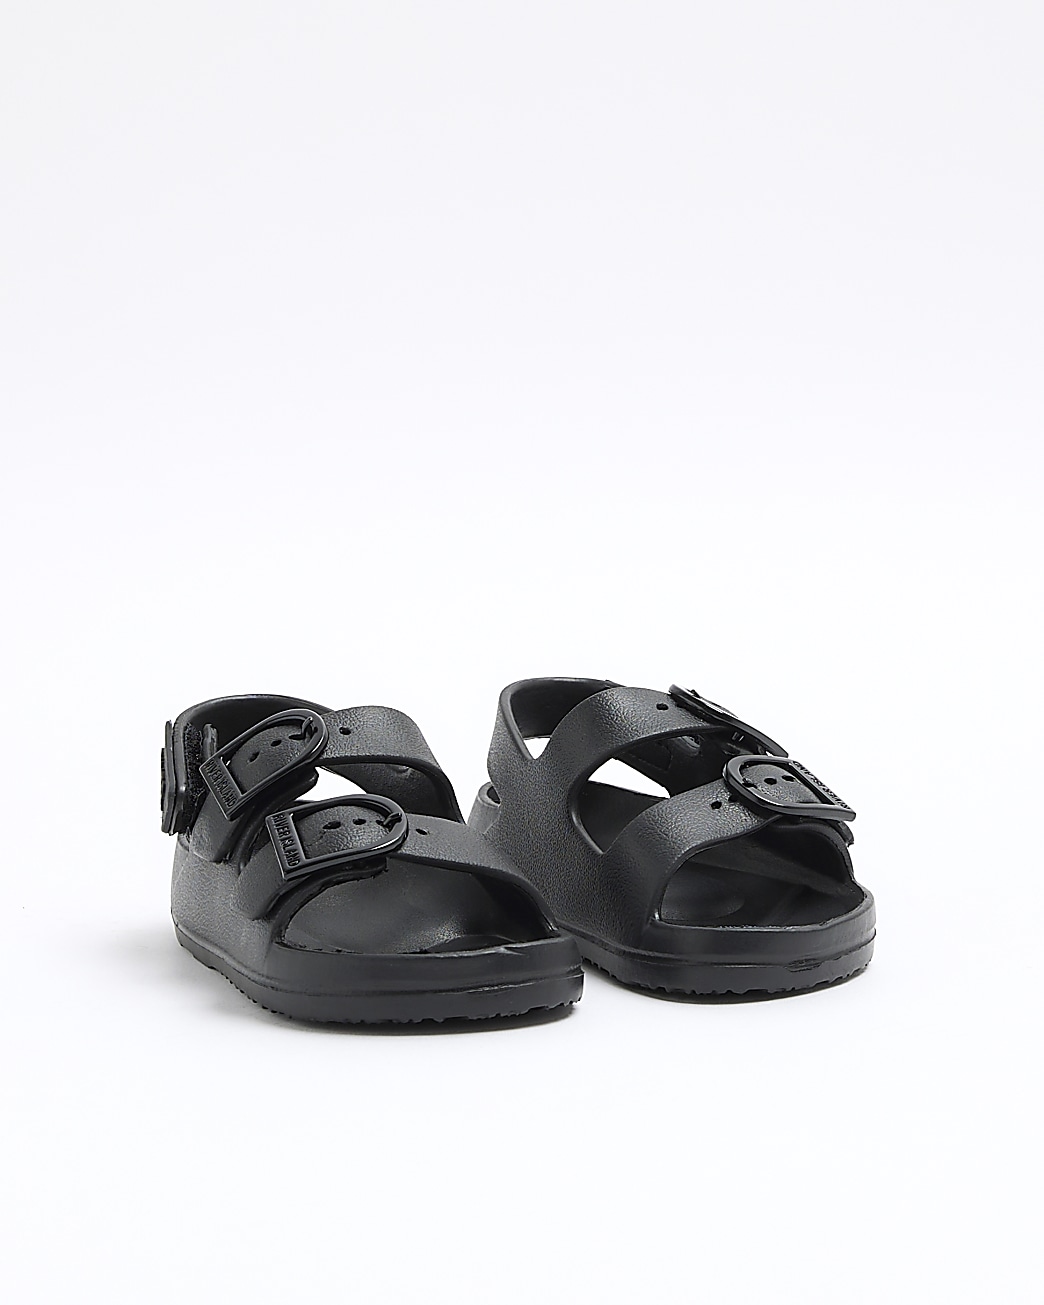 Visual filter display for Baby Boys Sandals